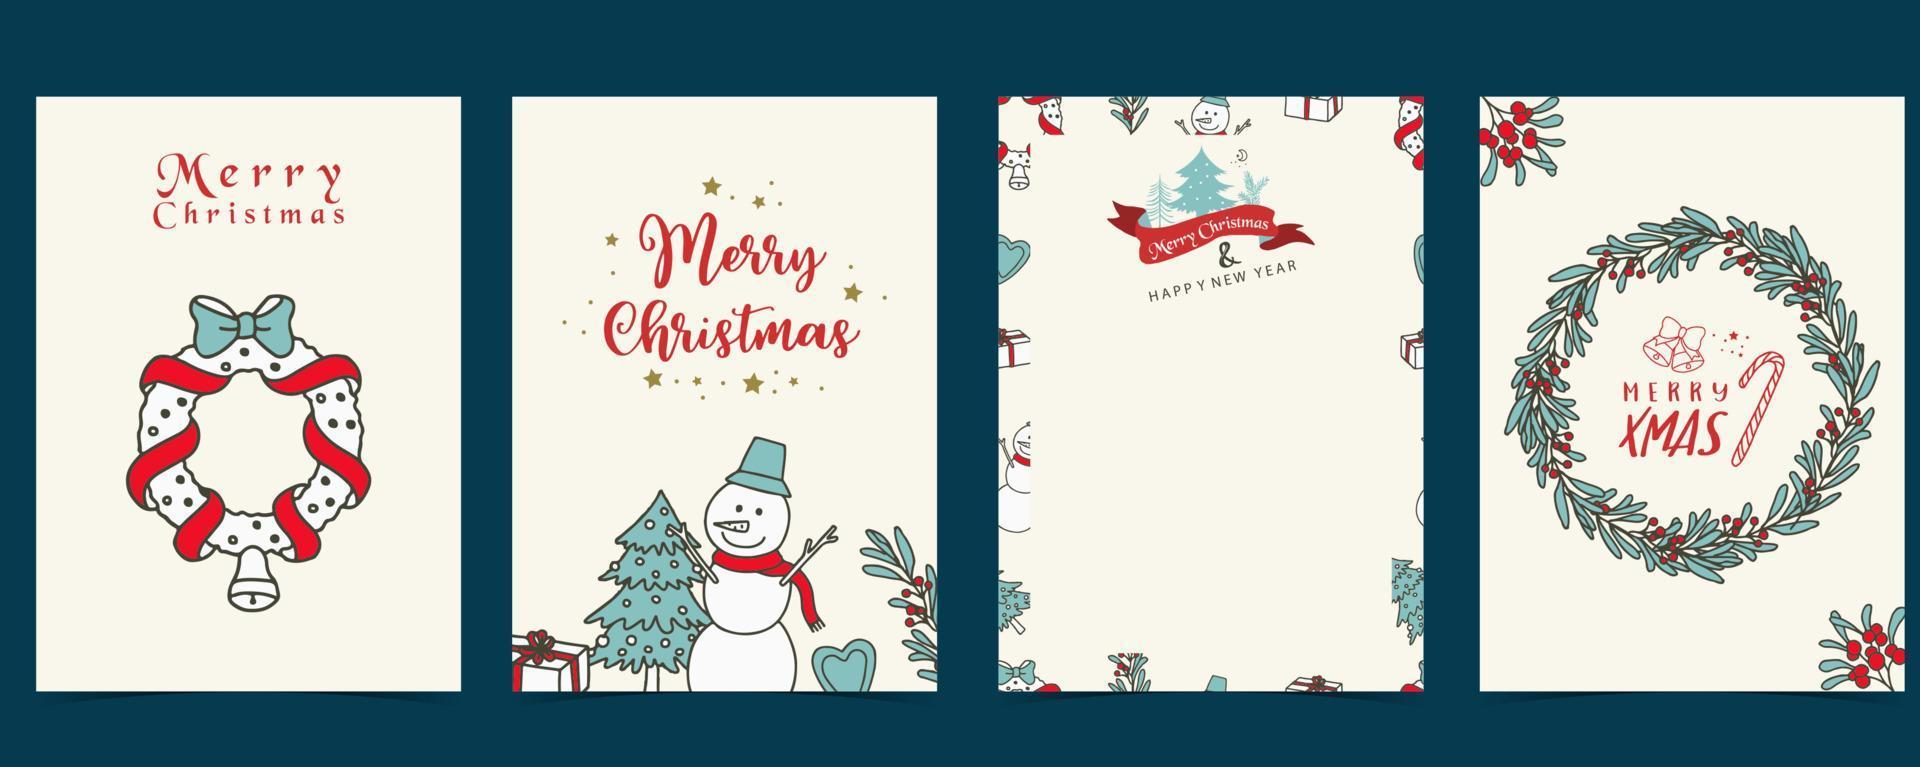 Collection of Christmas background set with tree,snowman,flower,leaves vector